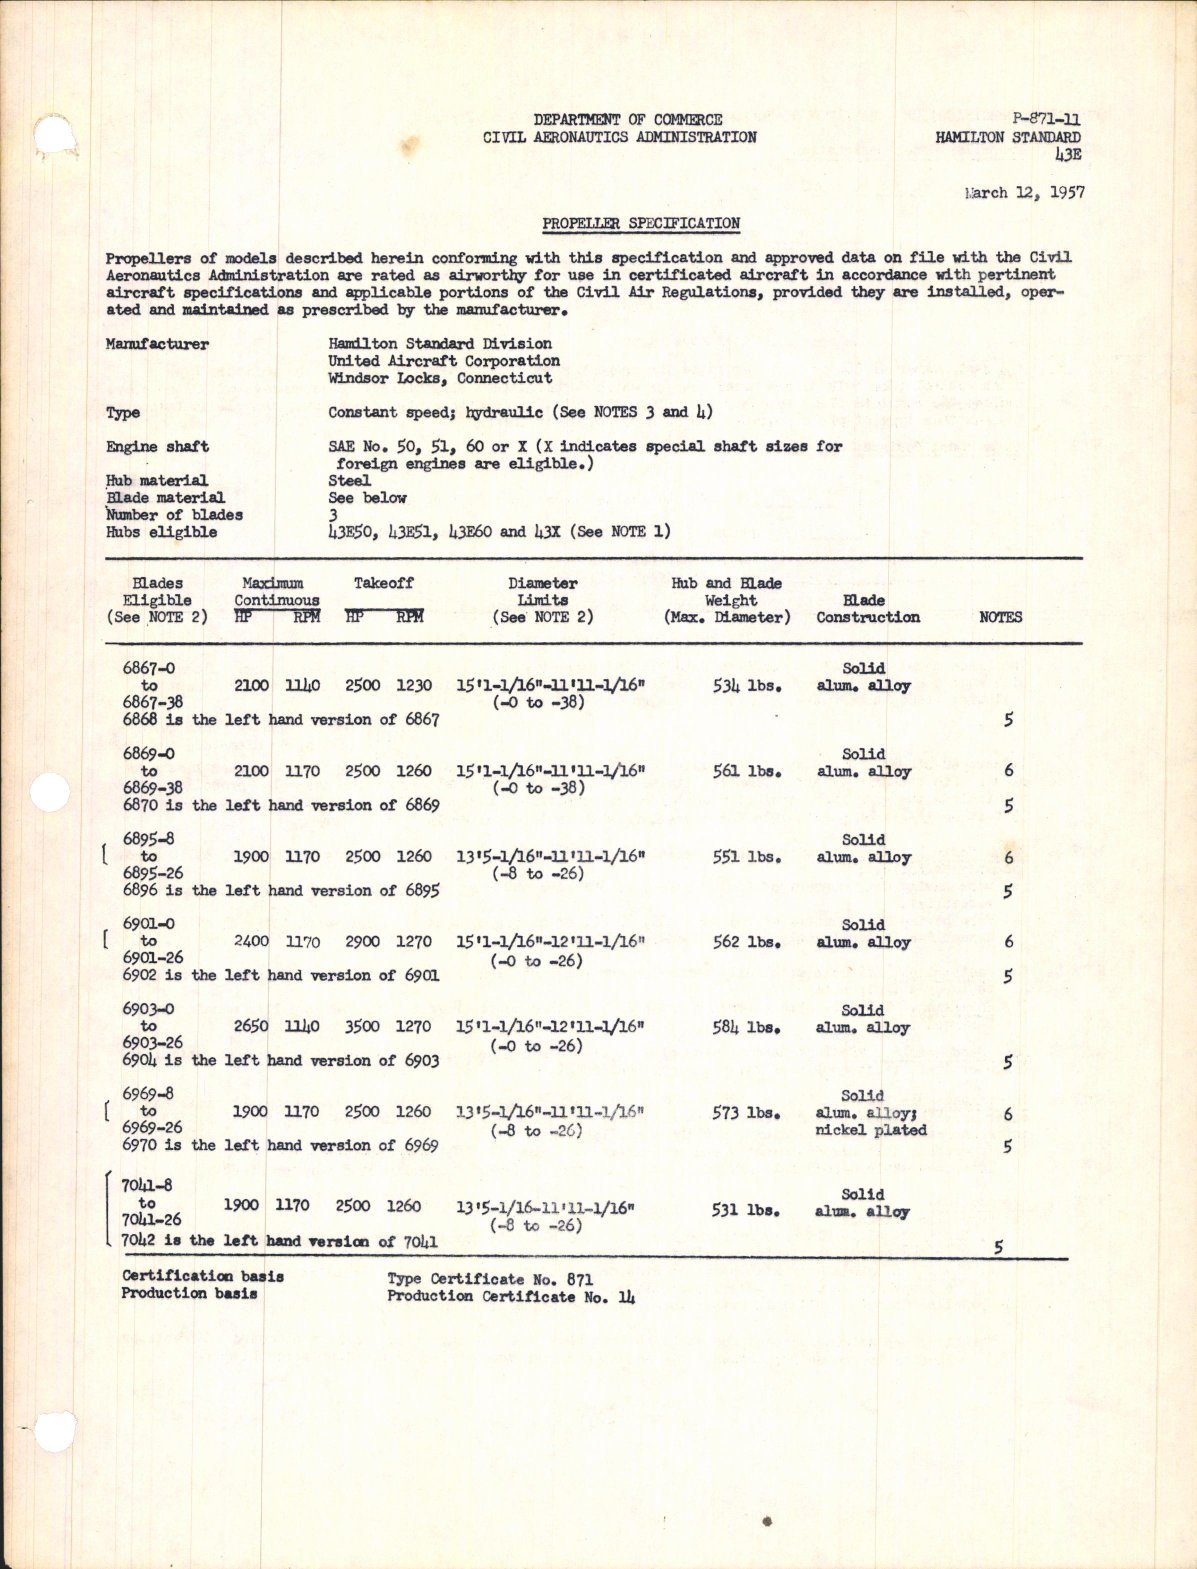 Sample page 1 from AirCorps Library document: Propeller Specification for 43E Propellers